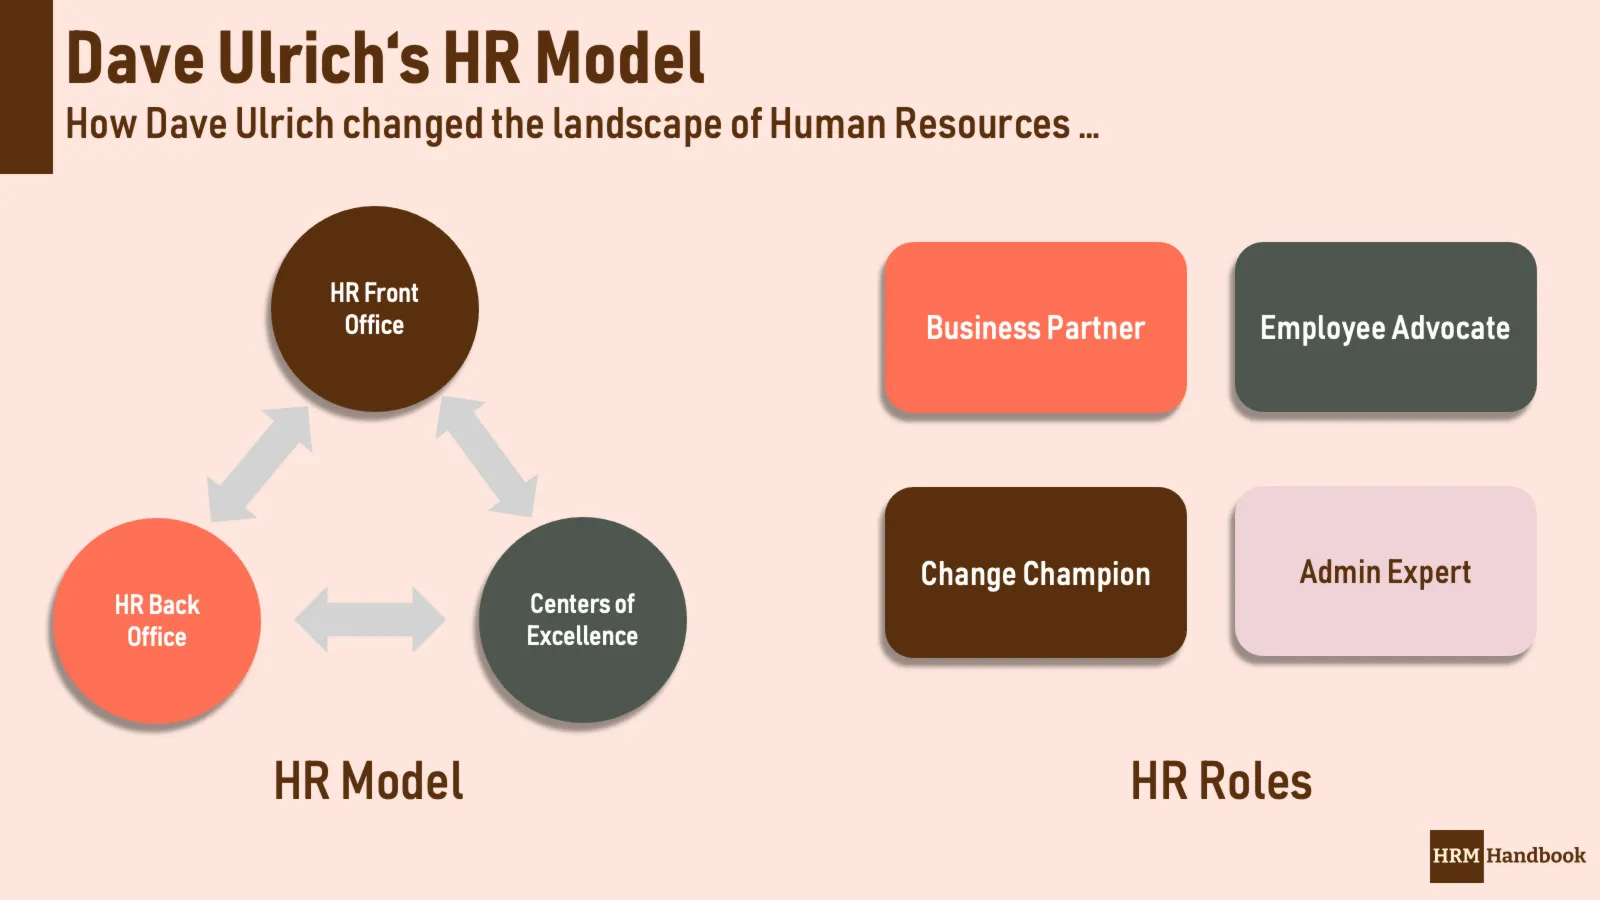 Dave Ulrich's HR Model and HR Roles